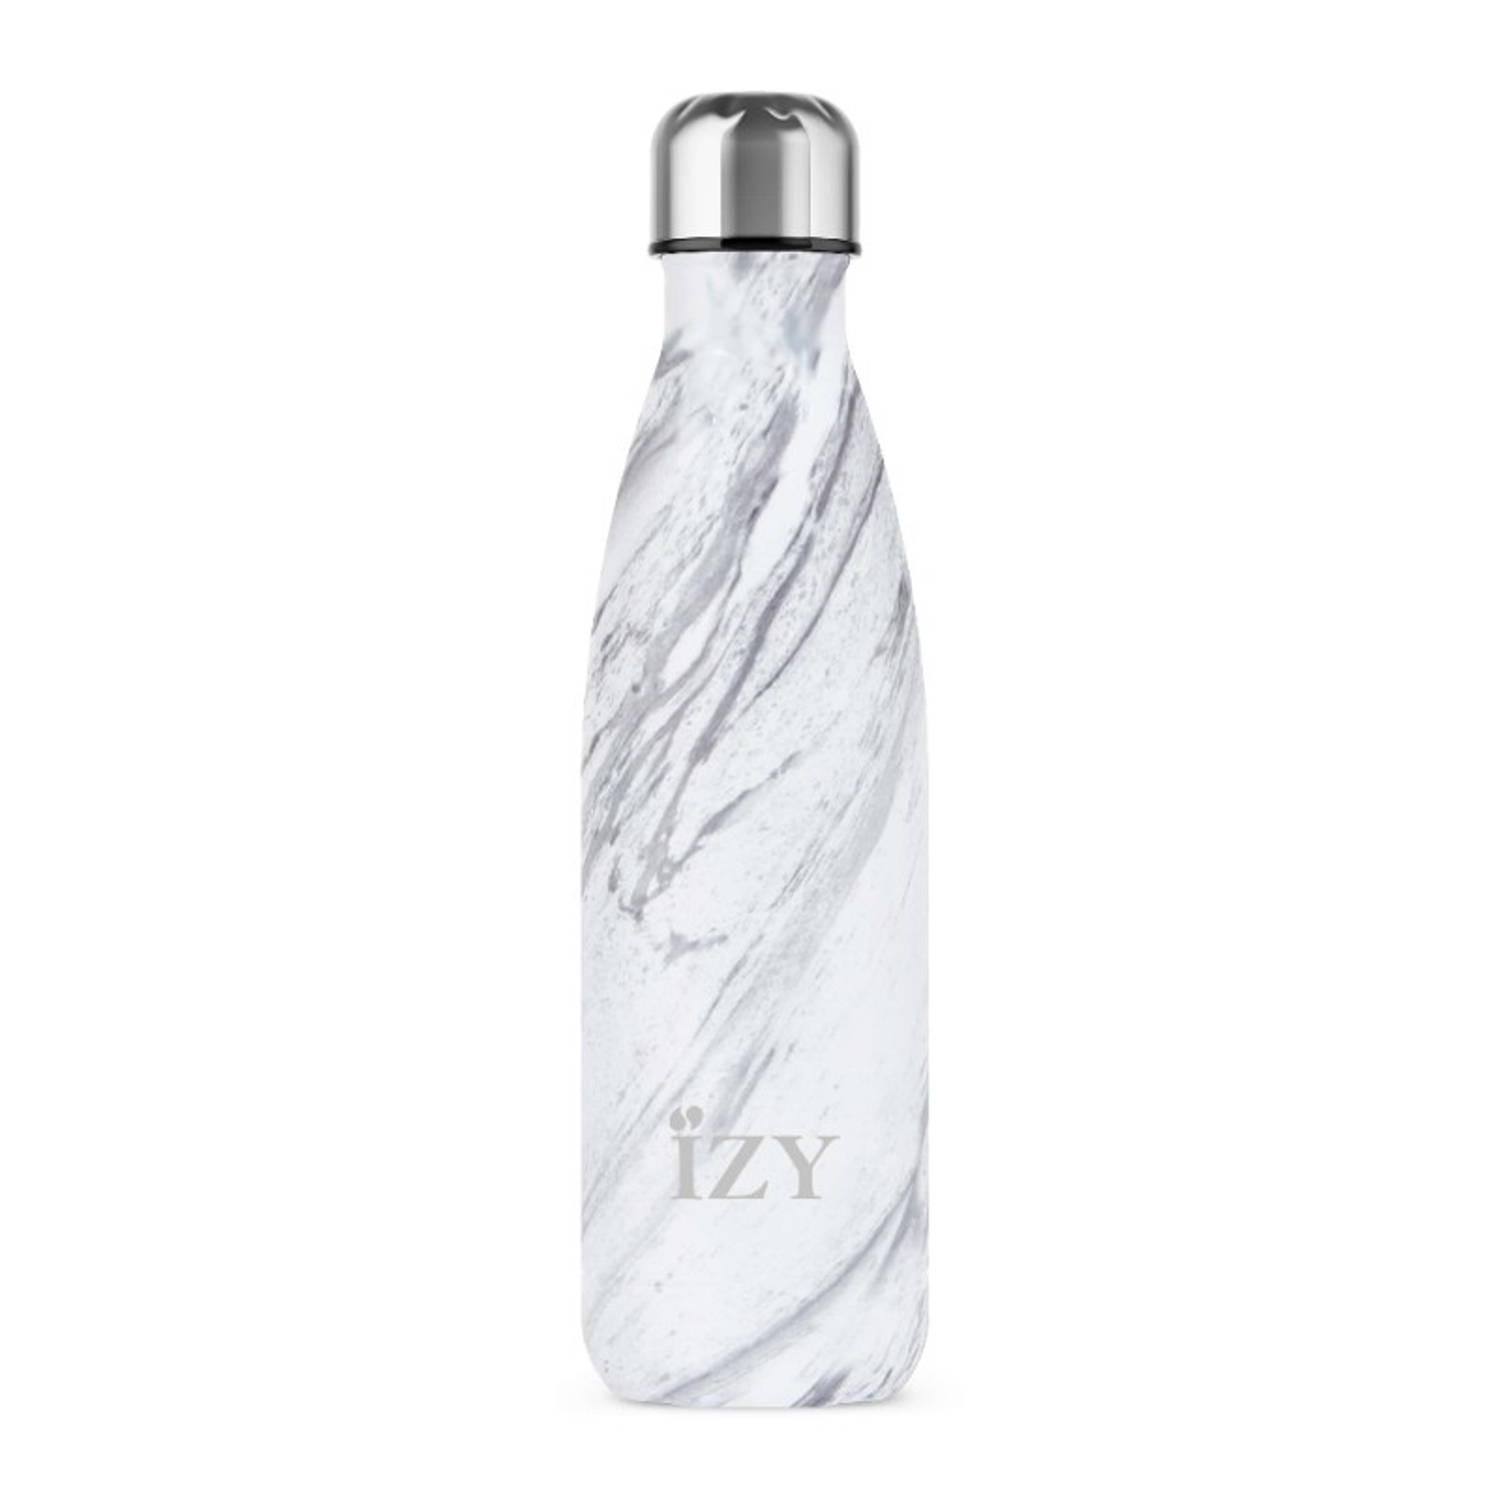 IZY - Thermosfles 0.5L, RVS, Marmer Wit - IZY Original Collection